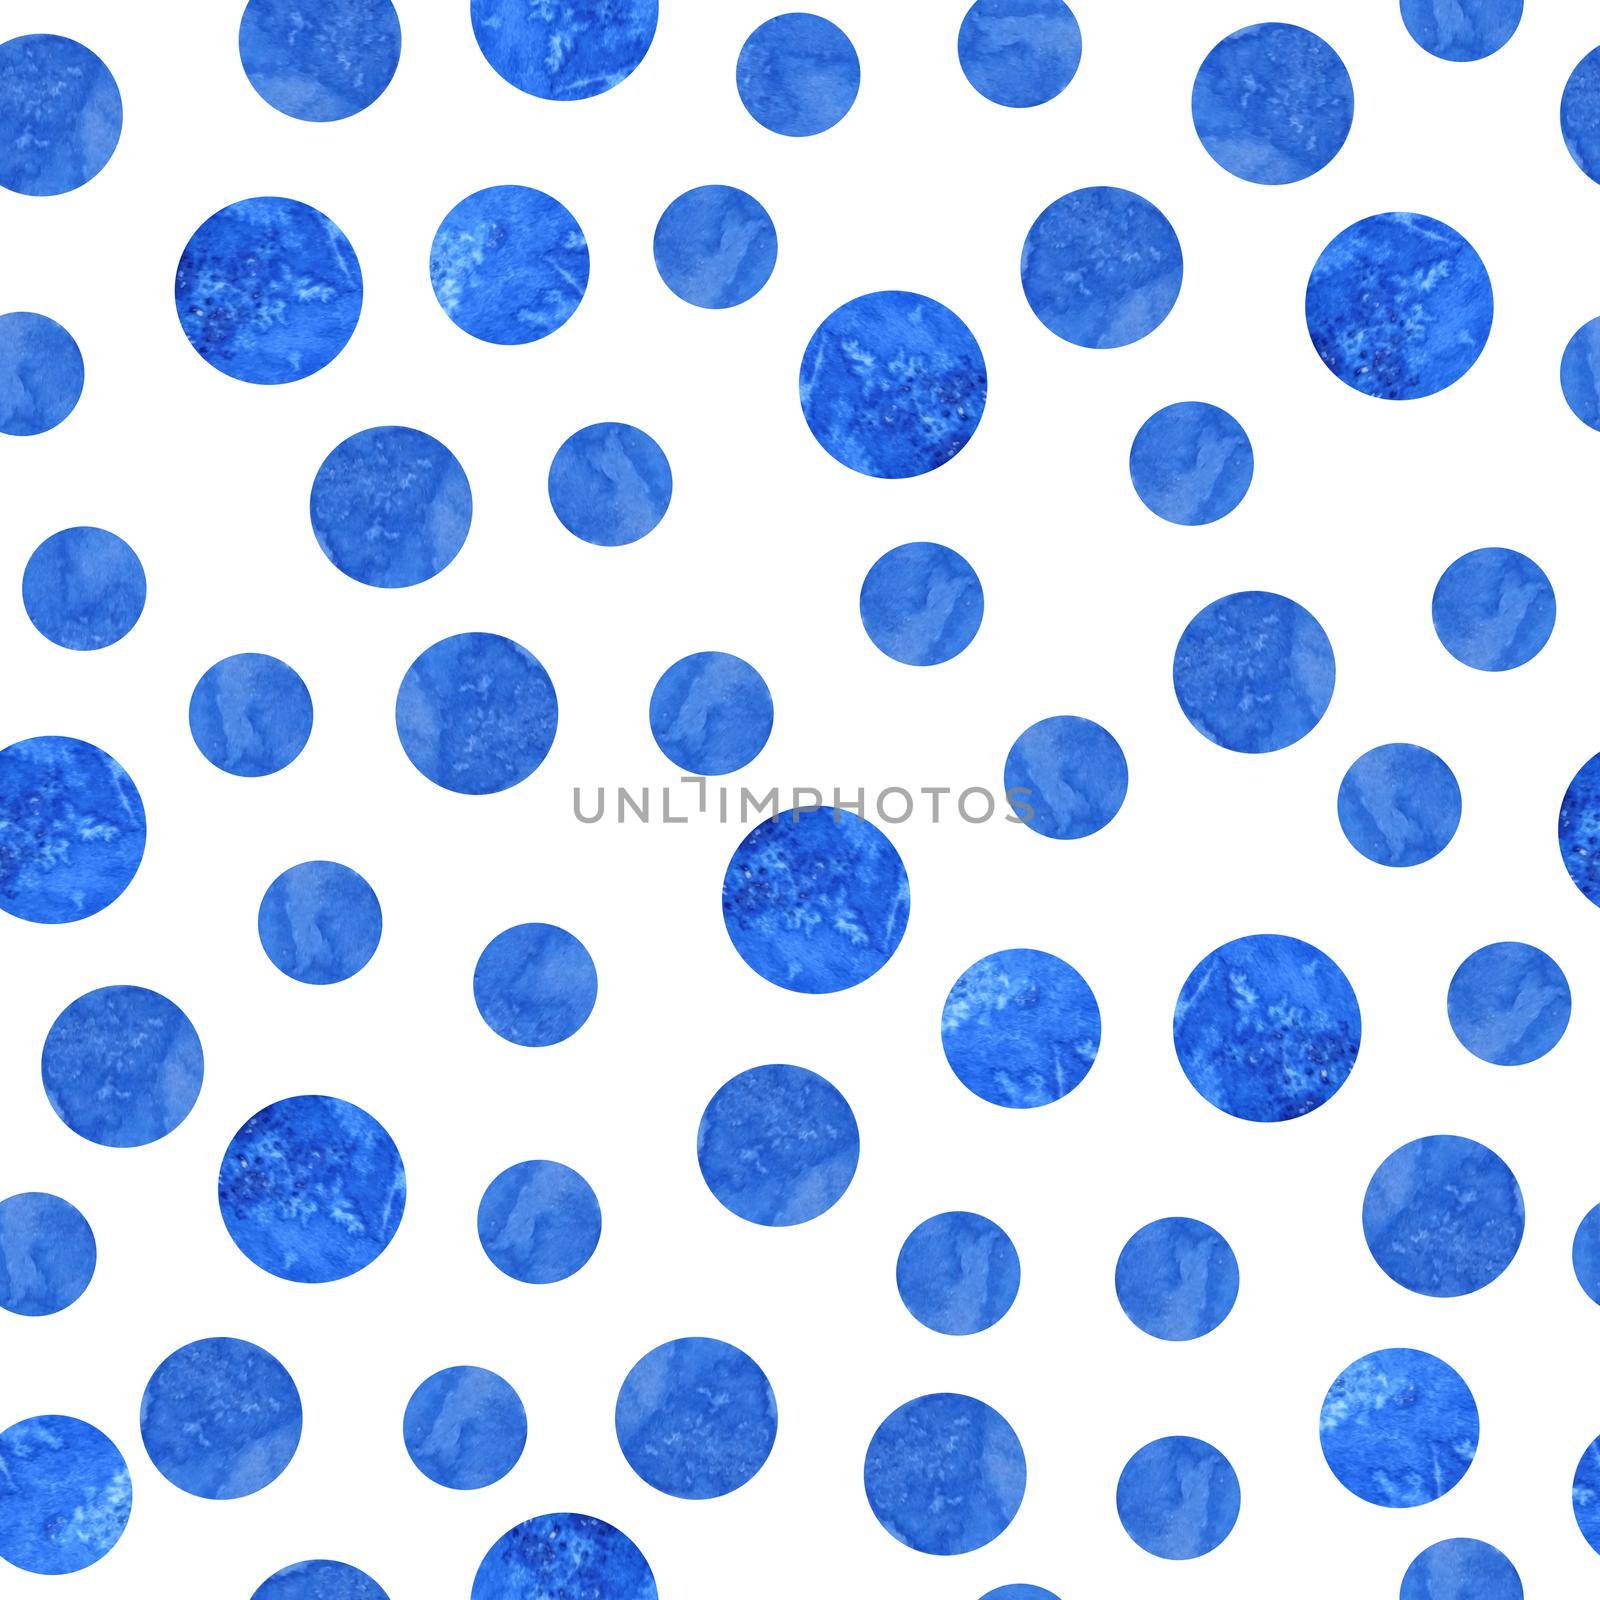 seamless watercolor hand drawn trendy pattern with modern contemporary geometric shapes. Round circle polka dot minimalism elements. Electric deep classic blue navy colors. Loose elements, minimalist design. by Lagmar